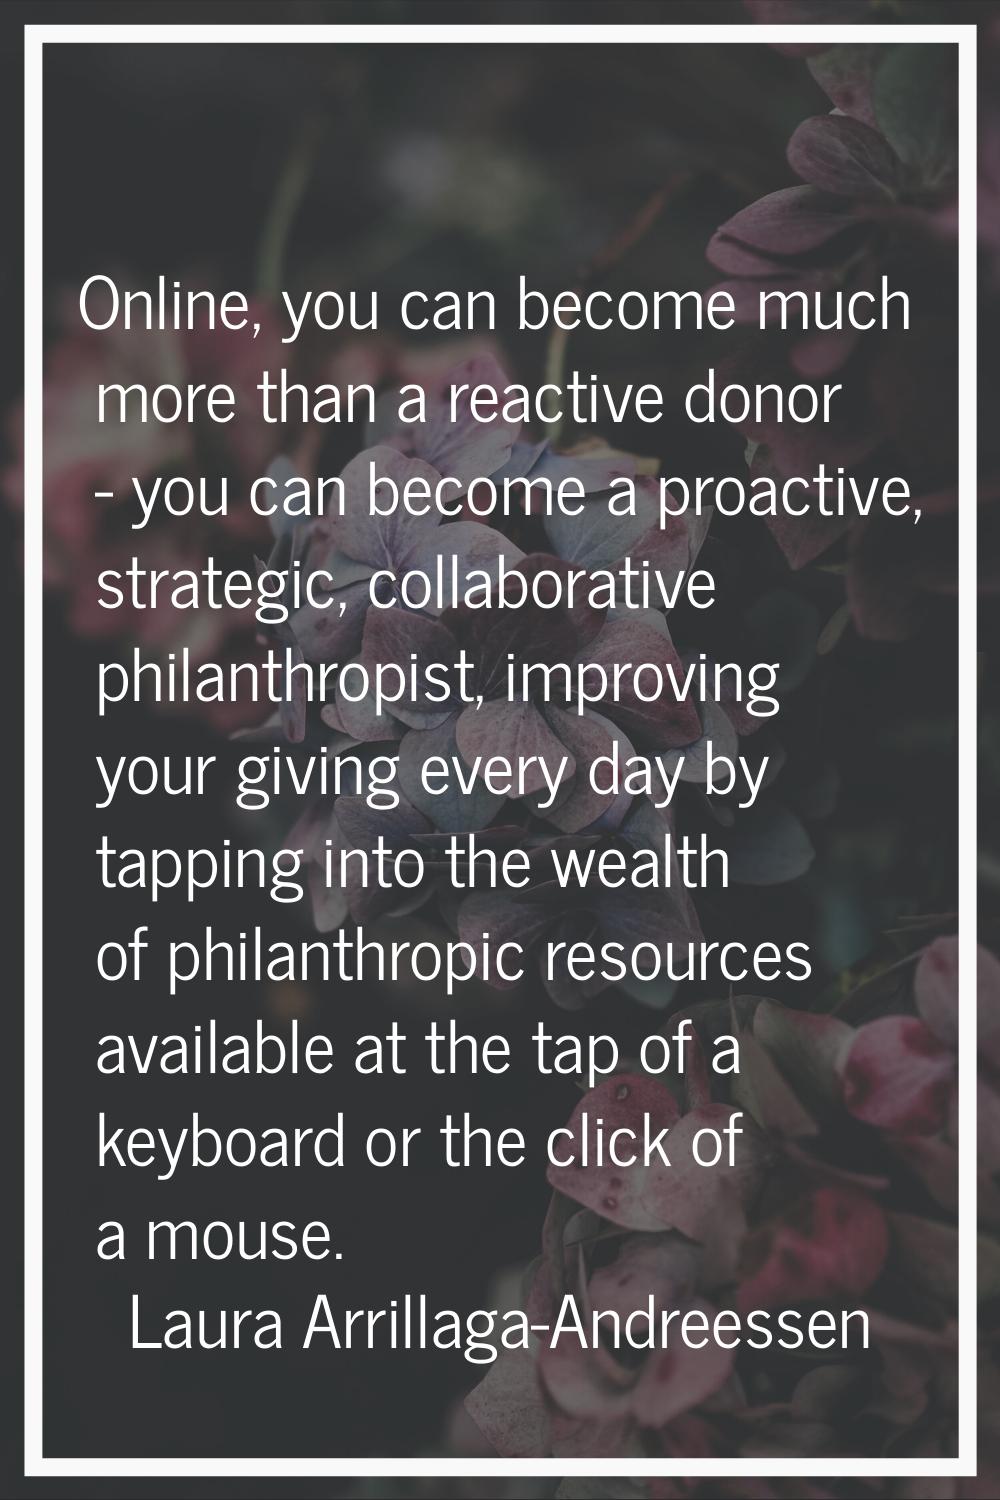 Online, you can become much more than a reactive donor - you can become a proactive, strategic, col